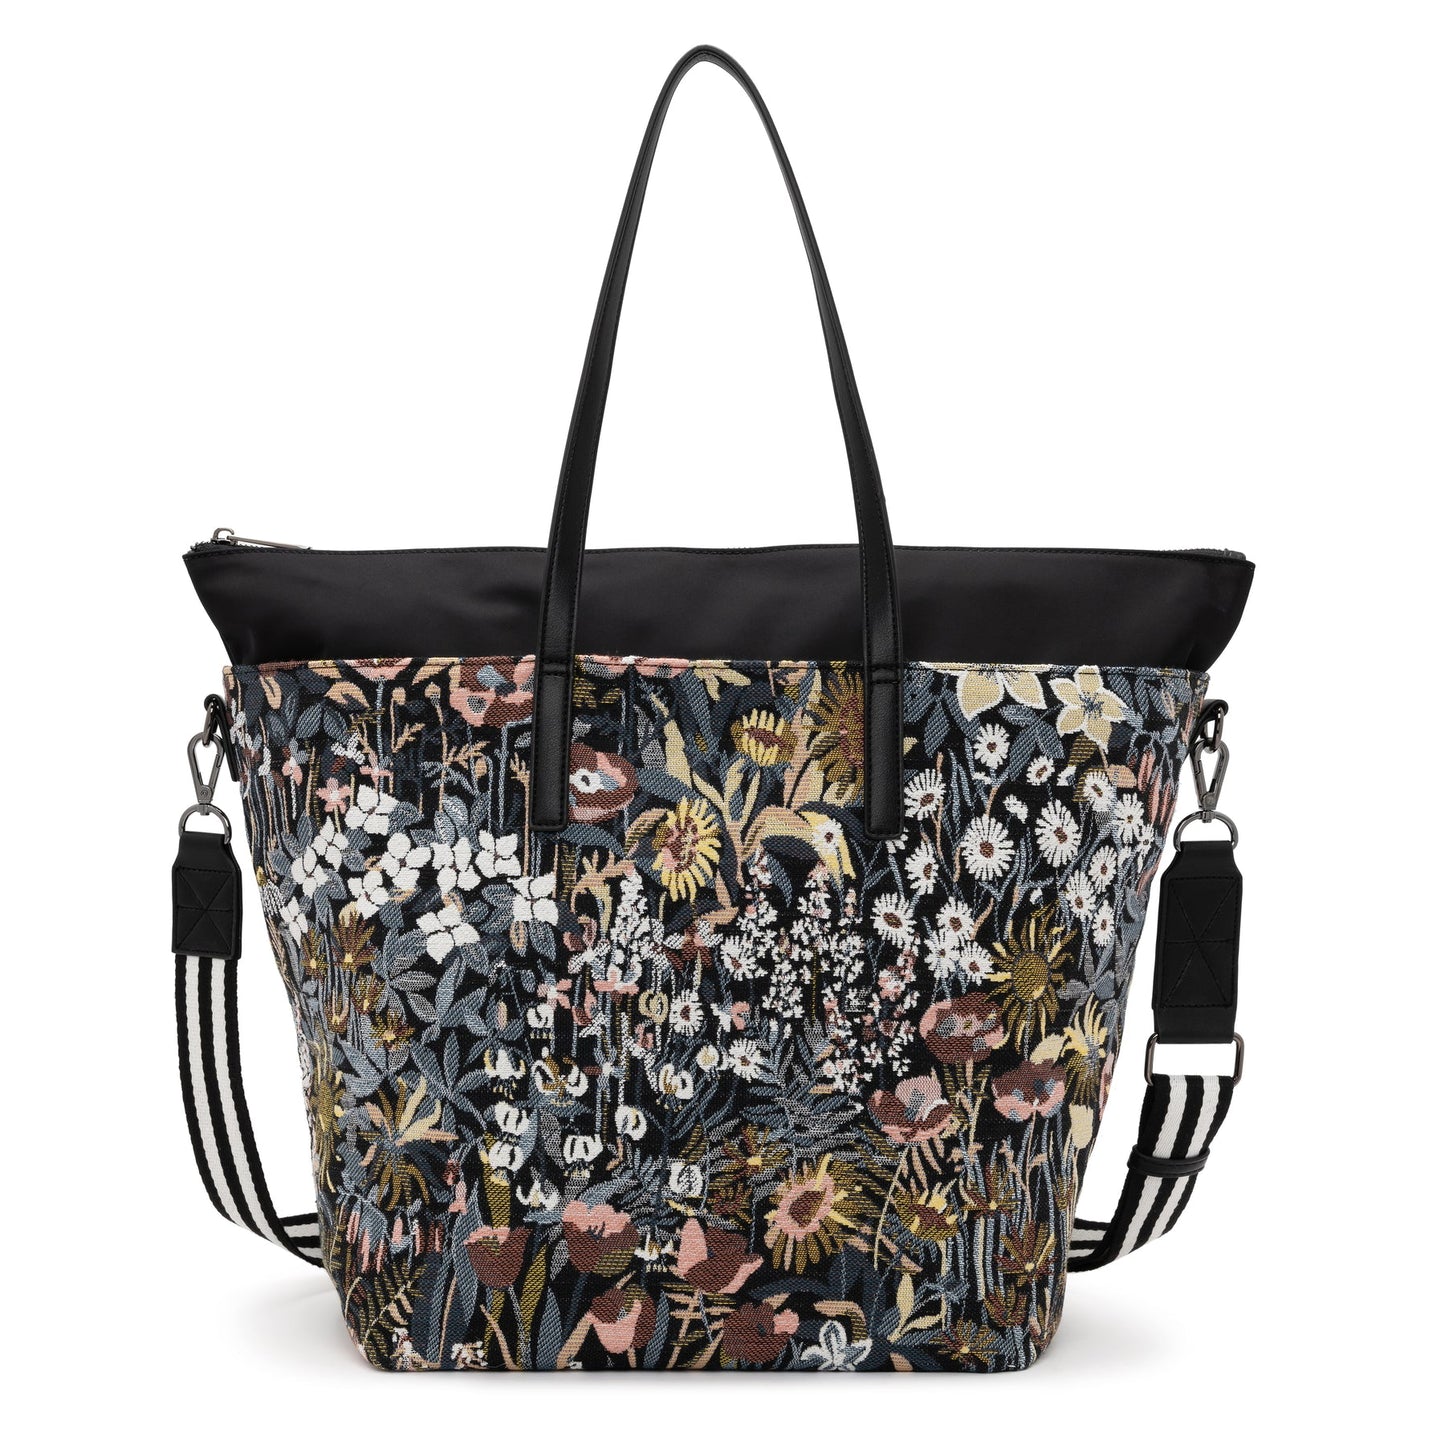 Co-Lab - The Reverie Tote